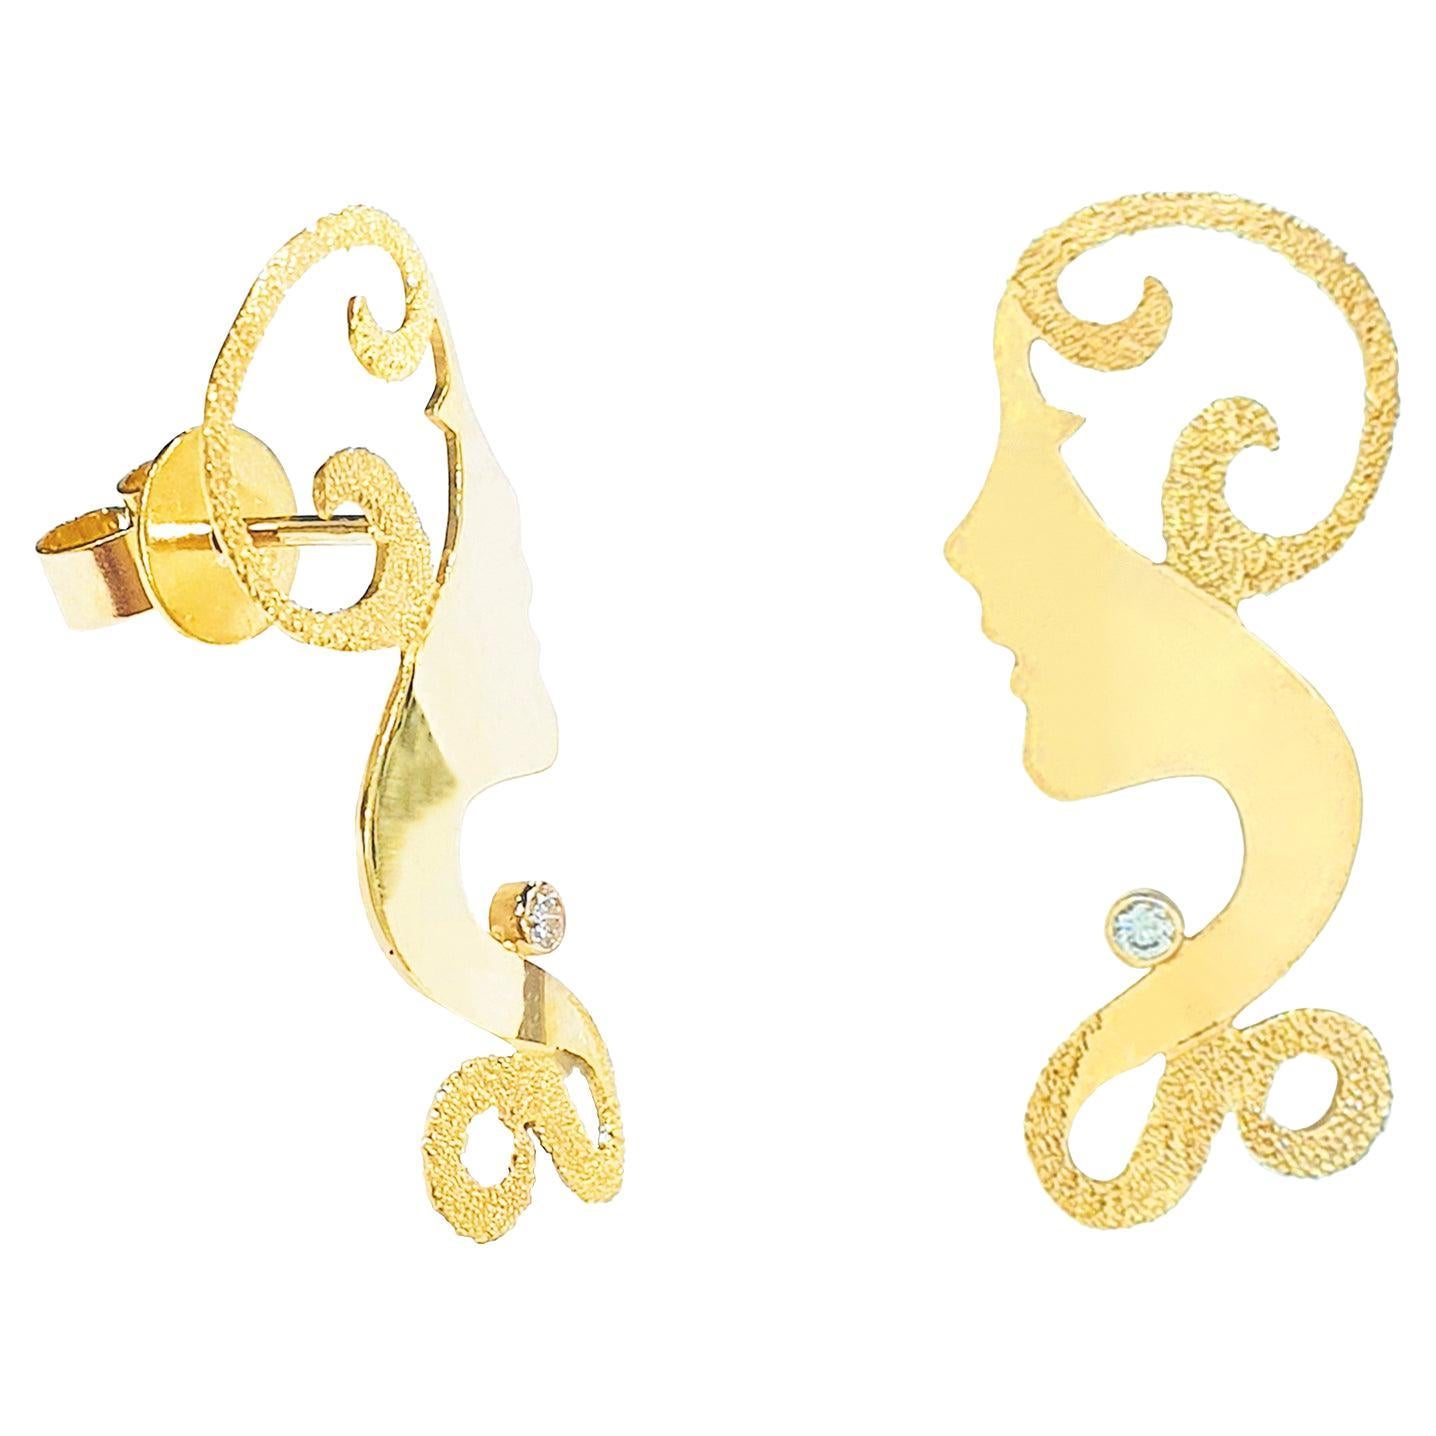 Paul Amey  "Silhouette Lady" 9K Gold and Diamond Stud Earrings For Sale